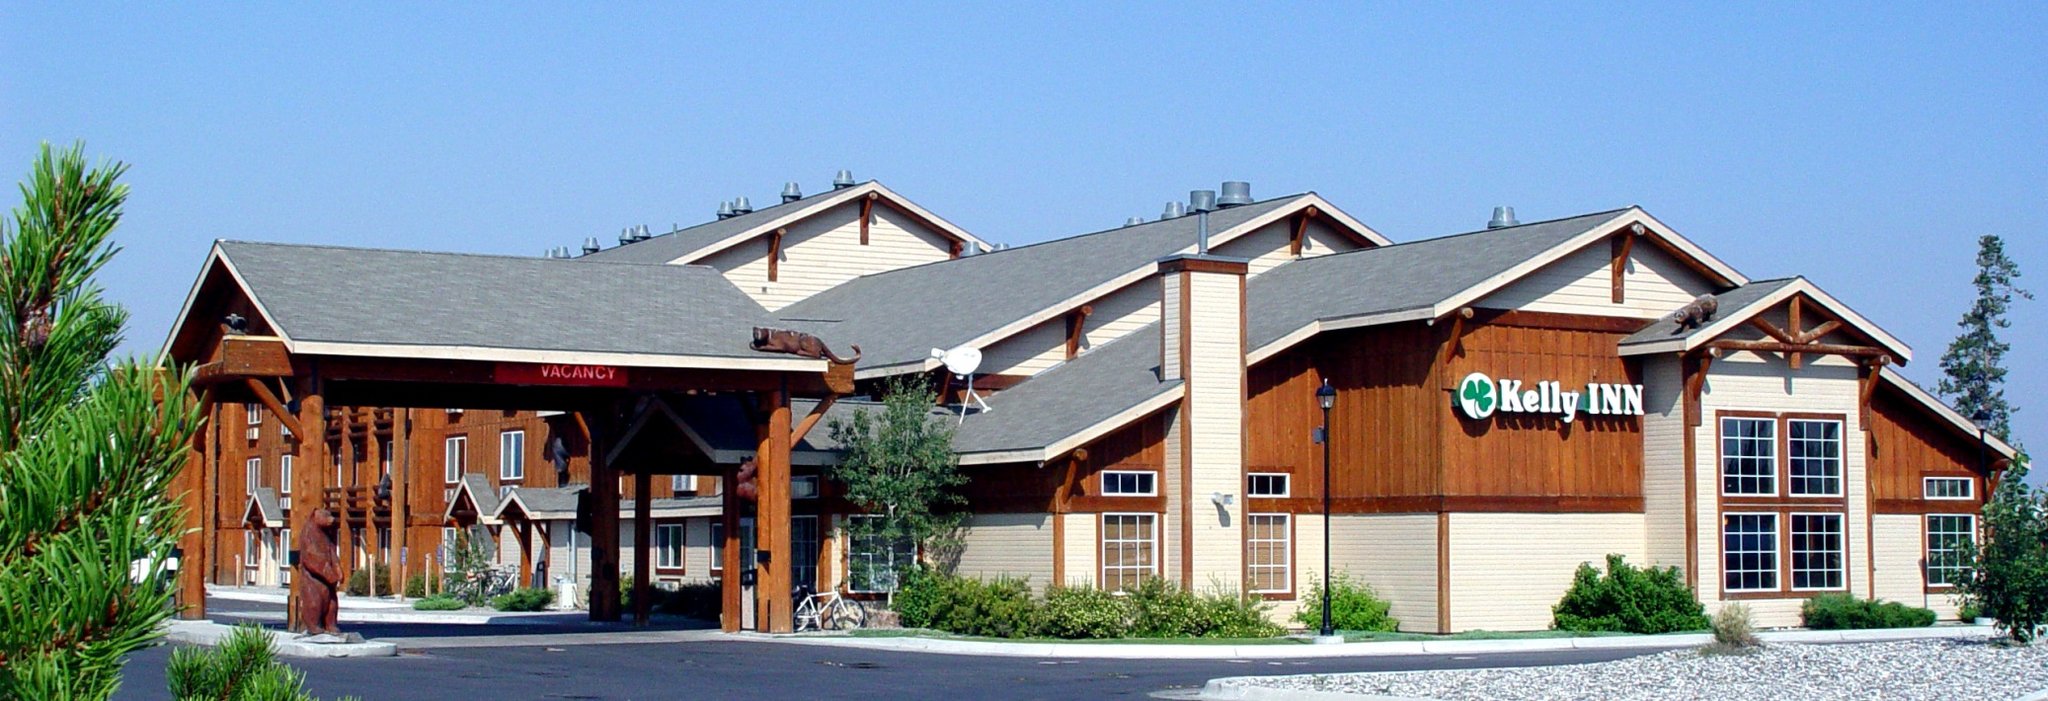 Kelly Inn West Yellowstone, MT Hotels GDS Reservation